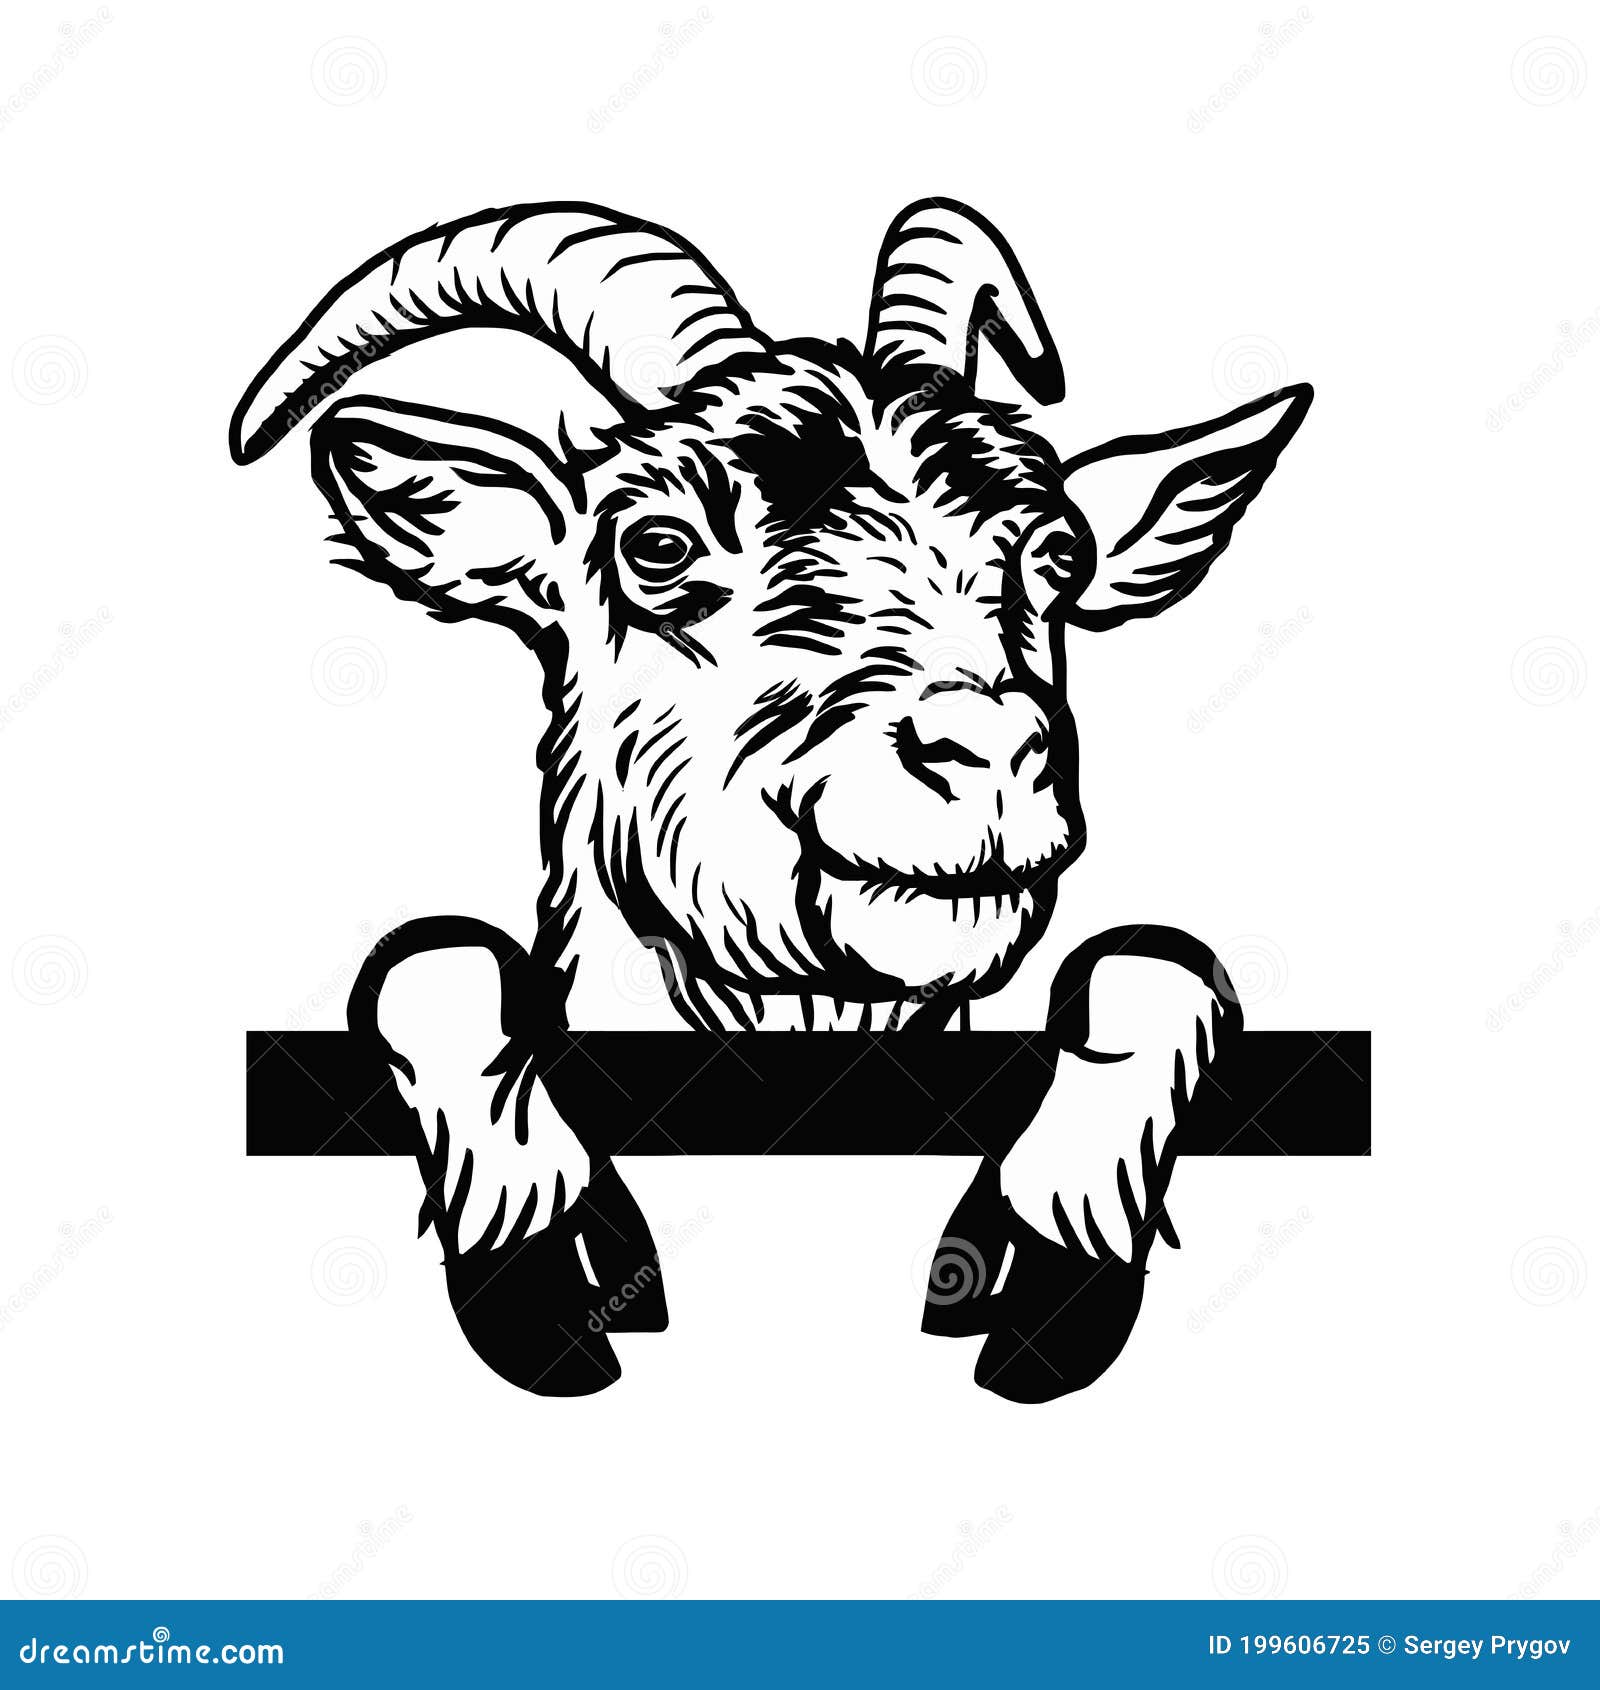 horned goat - cheeky goat peeking out - face head  on white -  stock